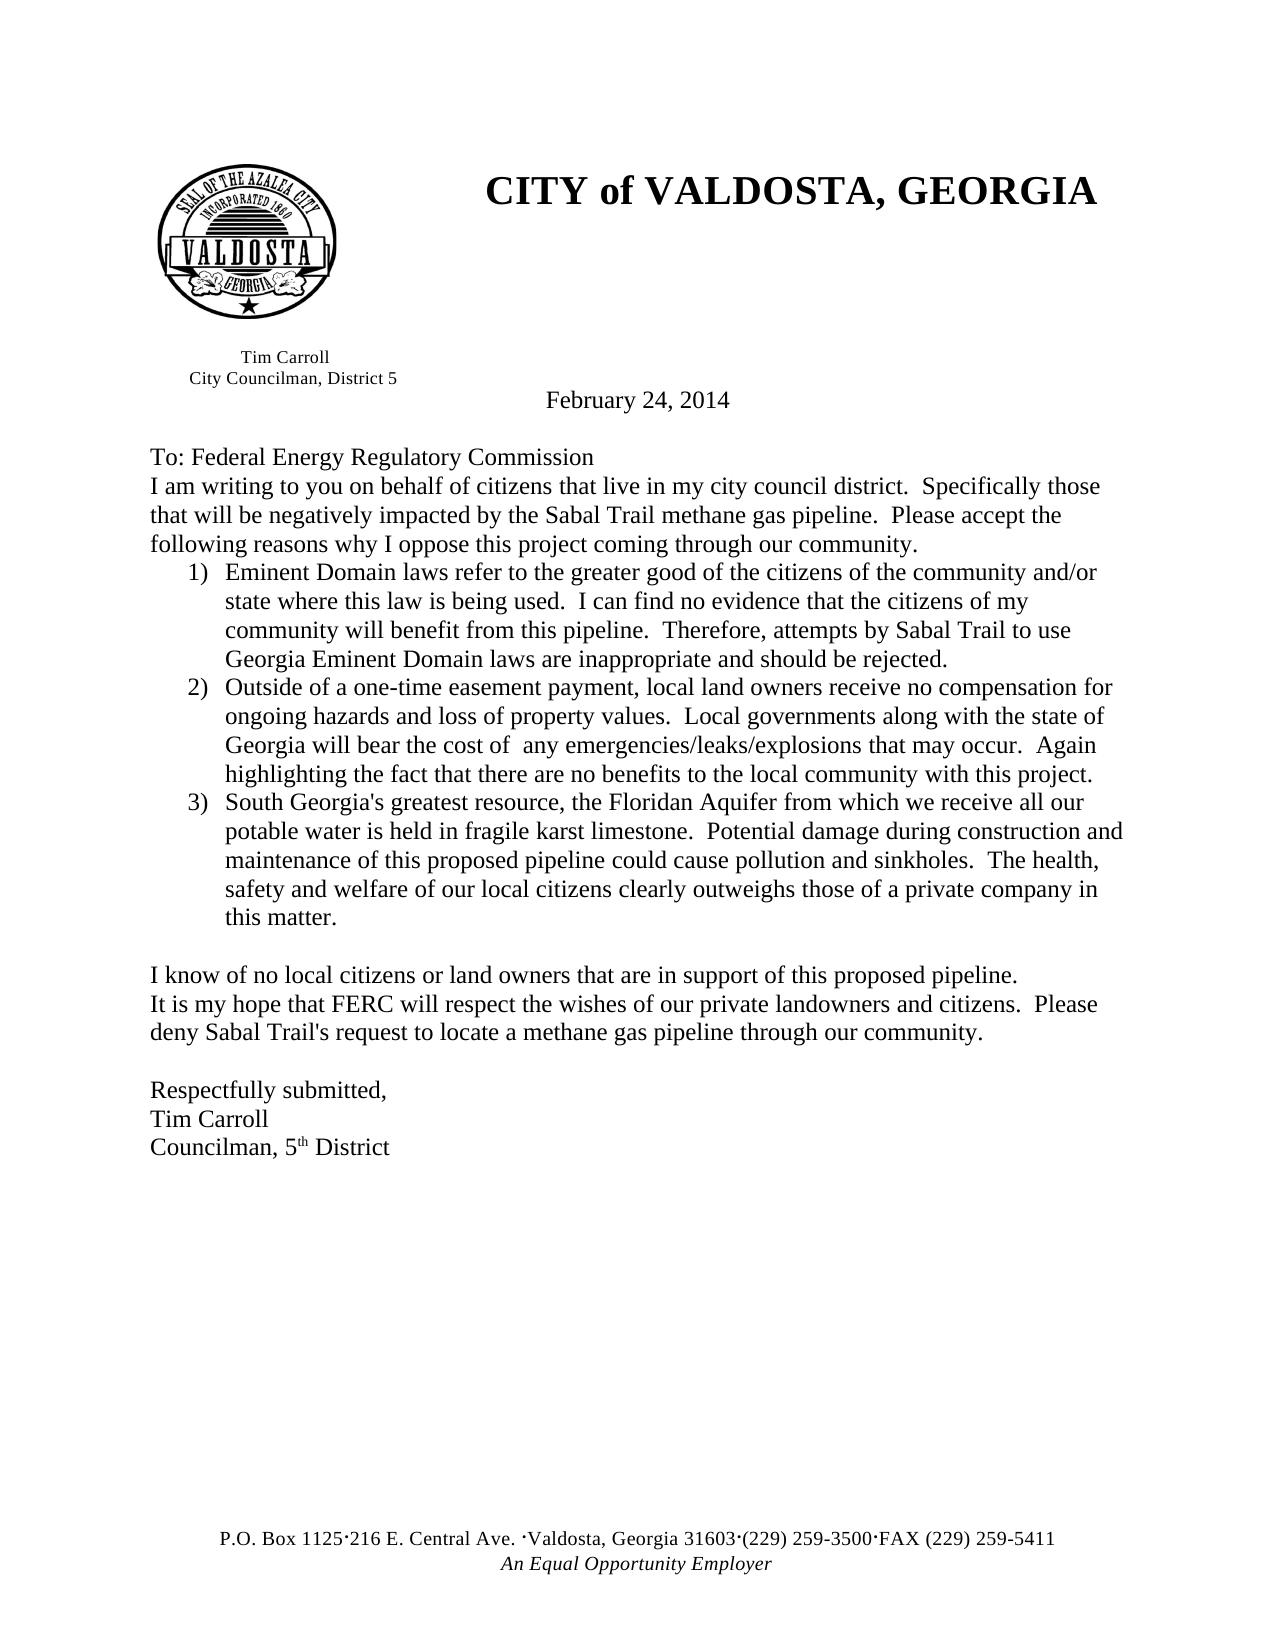 1275x1650 Letter on Valdosta City Council letterhead, in Property rights and water: please deny the Sabal Trail methane pipeline, by Tim Carroll, for Citizens living in Valdosta City Council District 5, 3 March 2014